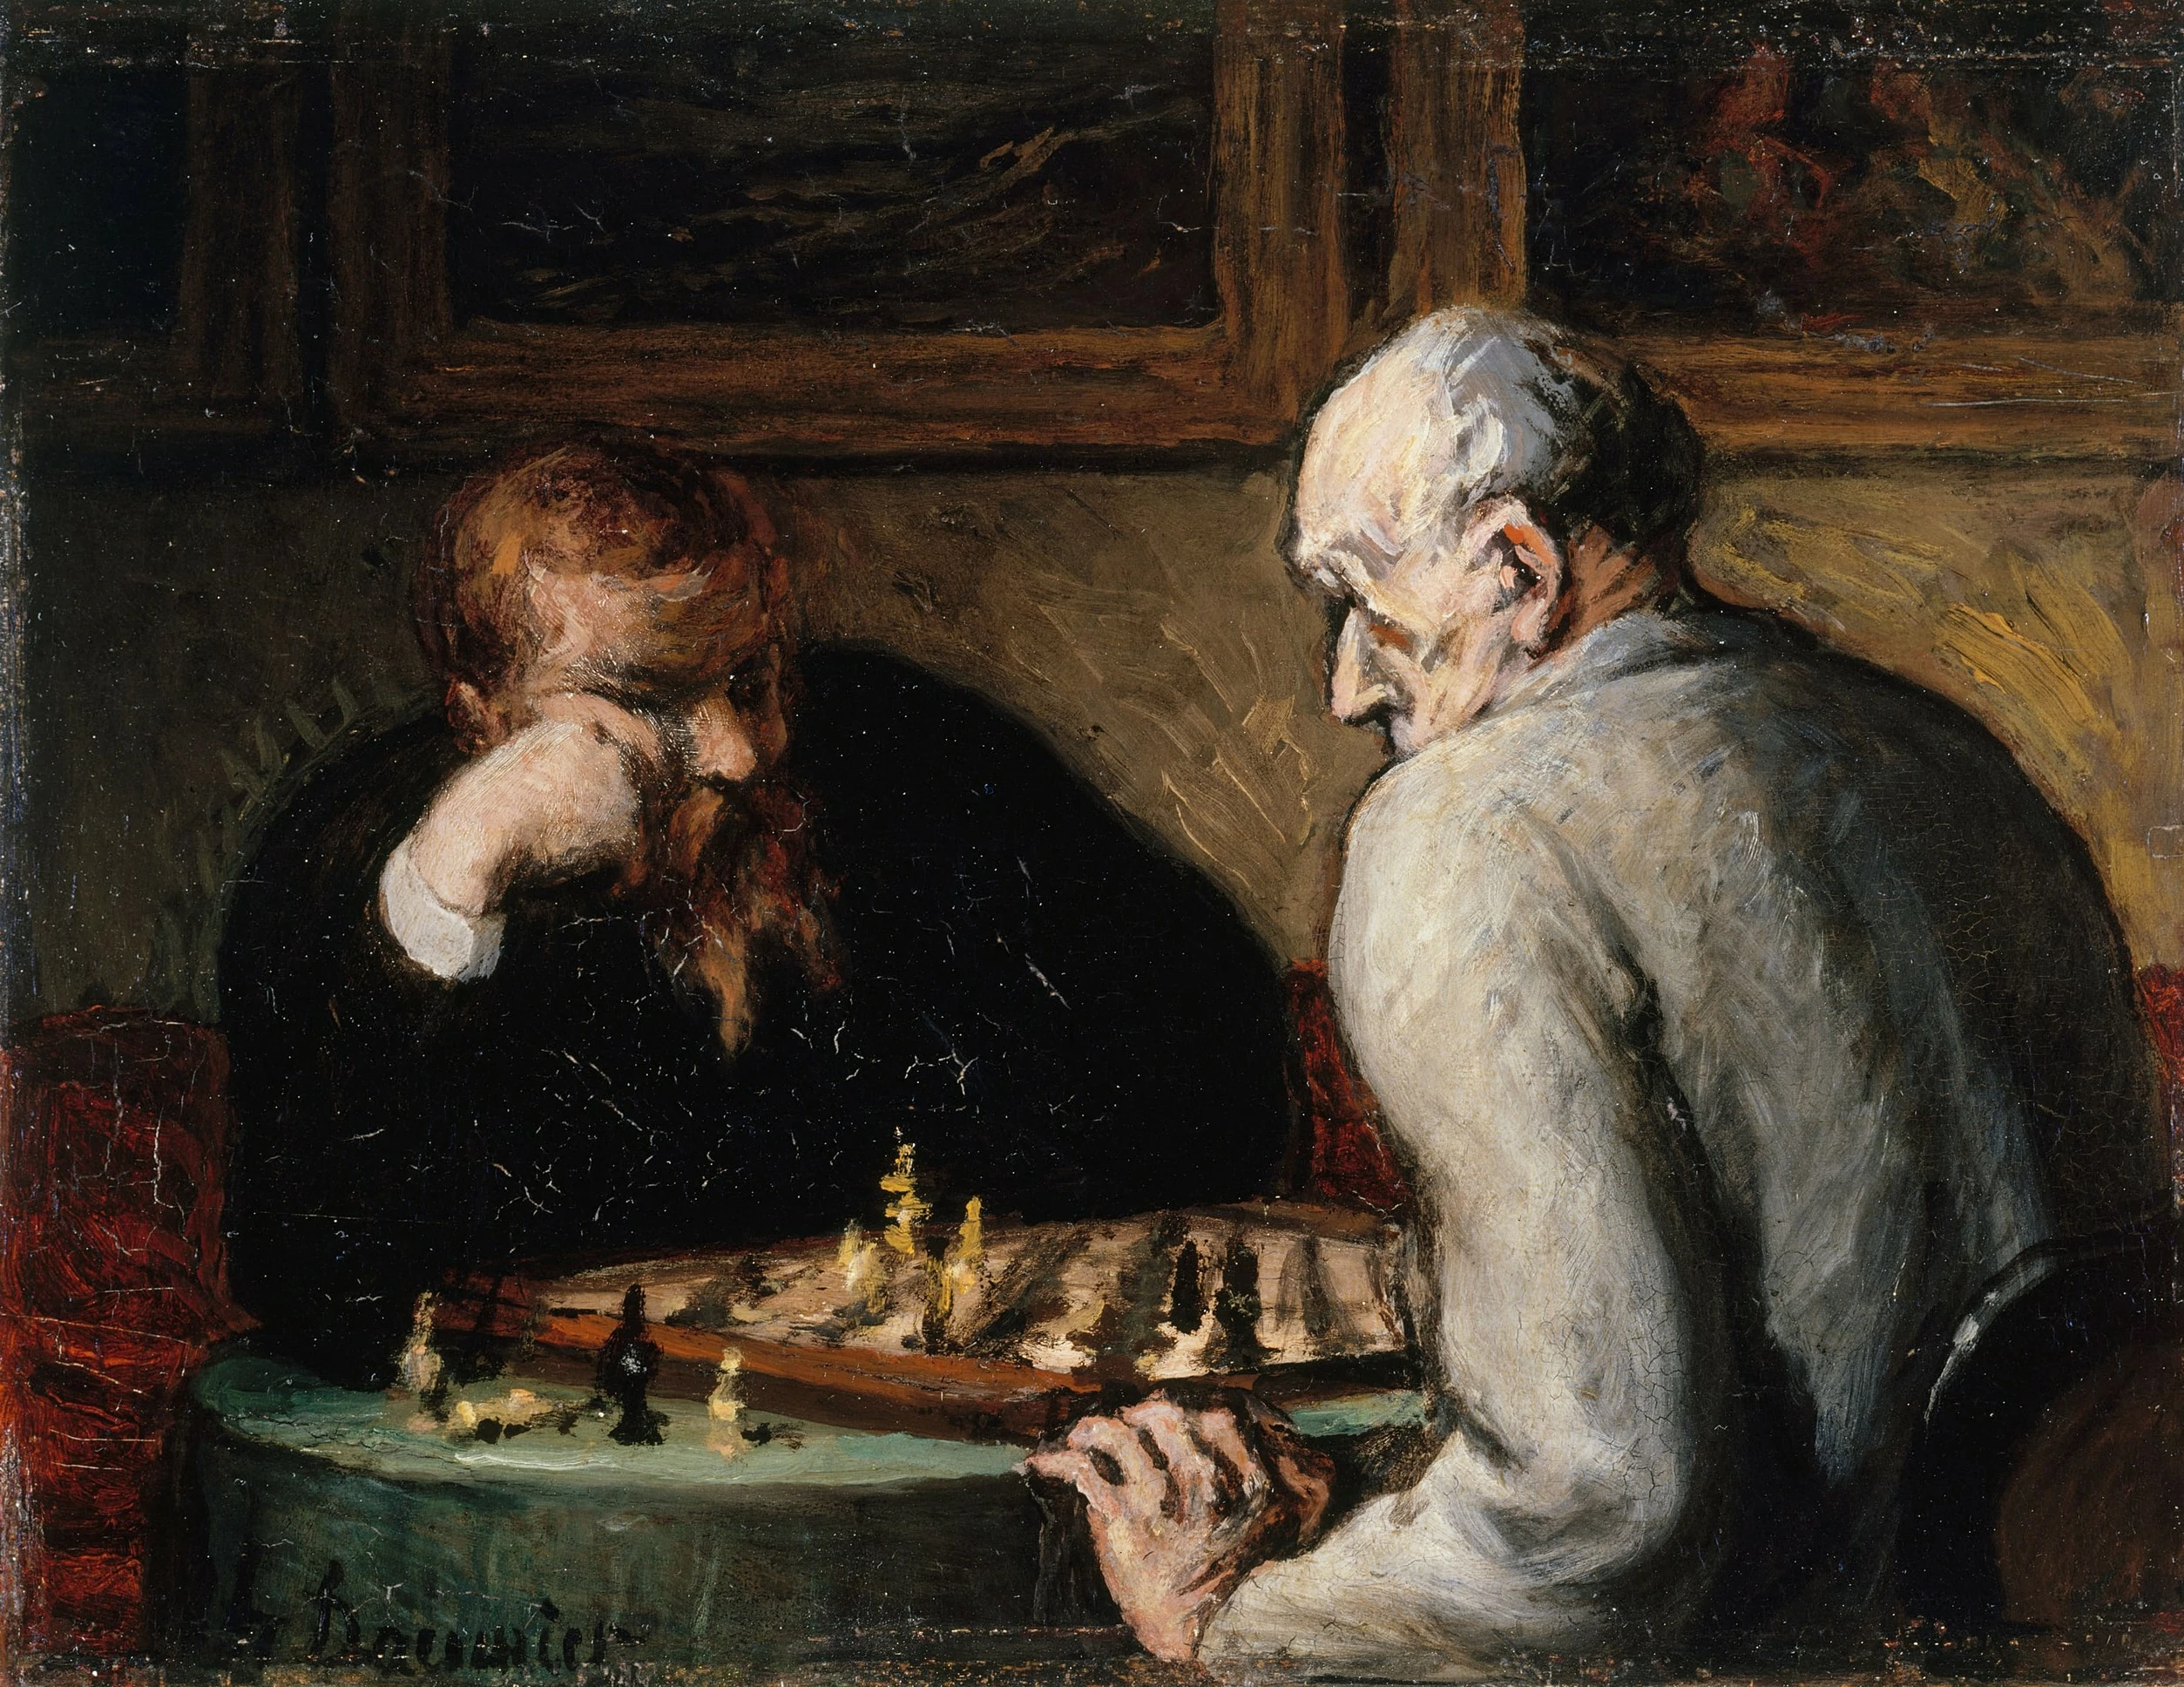 The Chess Players, Honoré Daumier